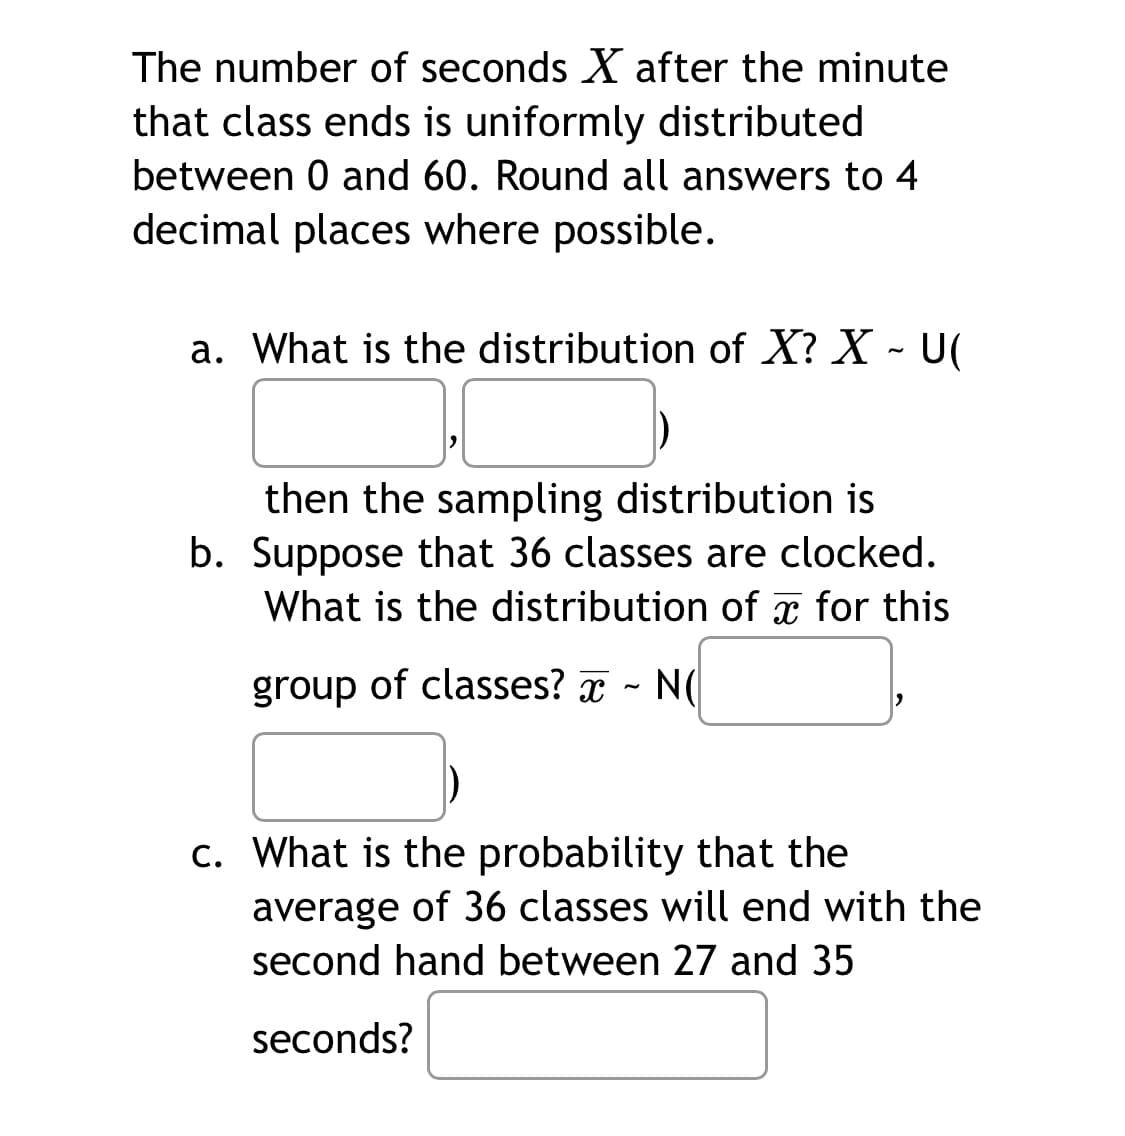 The number of seconds X after the minute
that class ends is uniformly distributed
between 0 and 60. Round all answers to 4
decimal places where possible.
a. What is the distribution of X? X - U(
then the sampling distribution is
b. Suppose that 36 classes are clocked.
What is the distribution of for this
group of classes? ~ N(
c. What is the probability that the
average of 36 classes will end with the
second hand between 27 and 35
seconds?